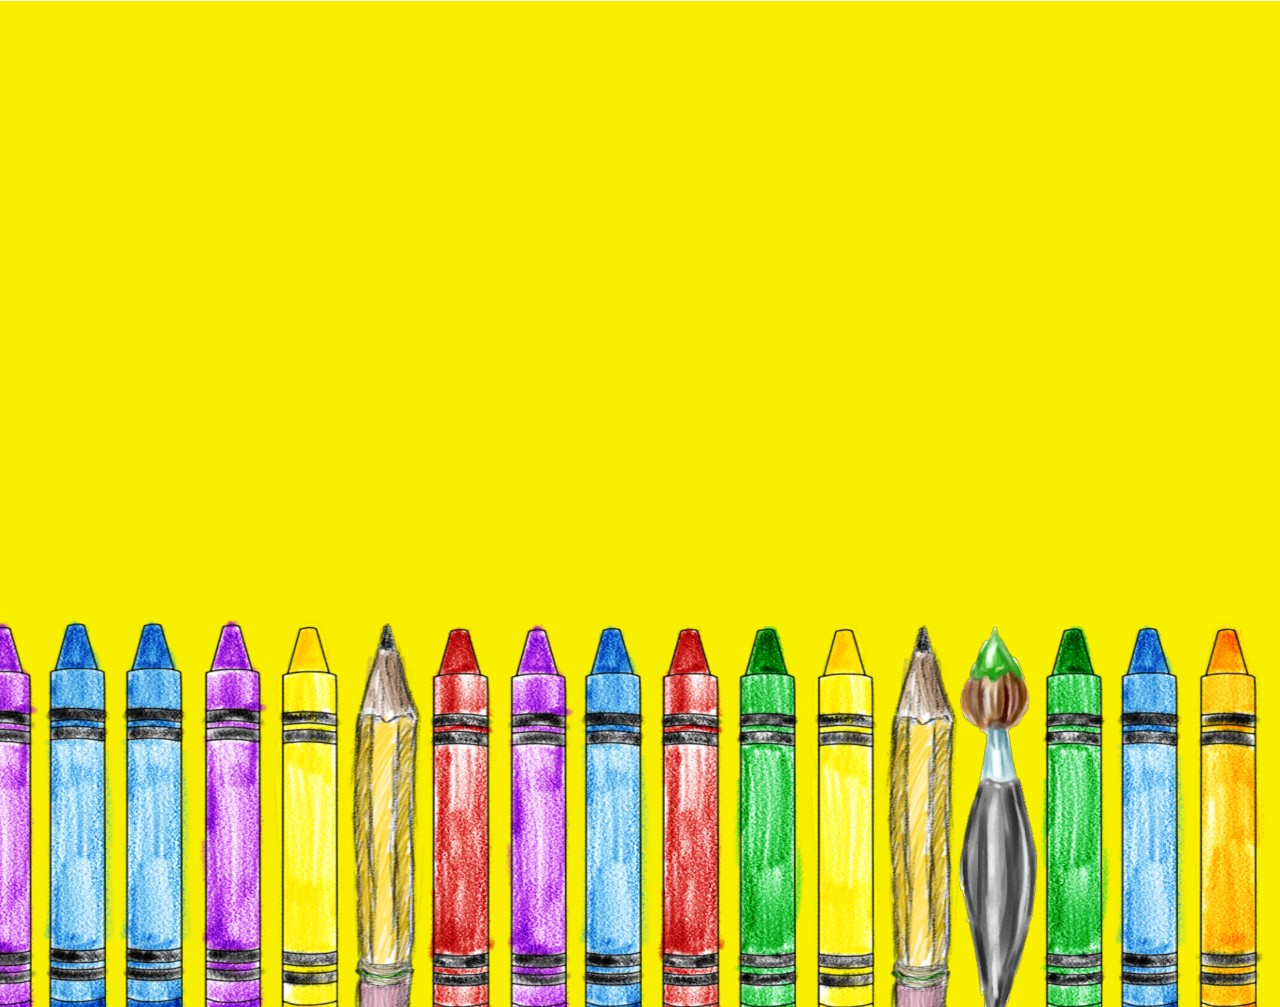 school wallpaper,colorfulness,crayon,yellow,writing implement,office supplies